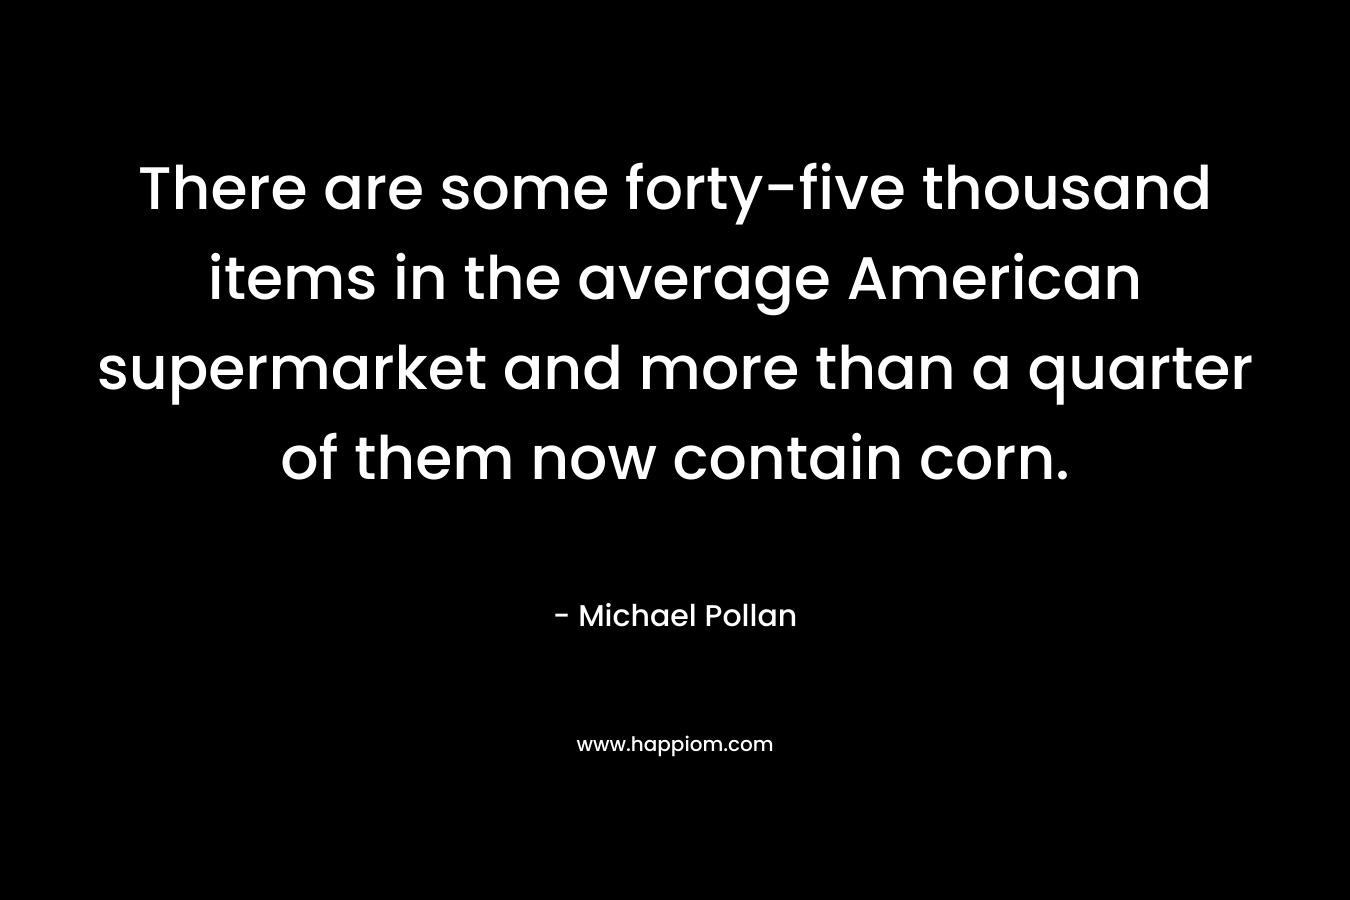 There are some forty-five thousand items in the average American supermarket and more than a quarter of them now contain corn.